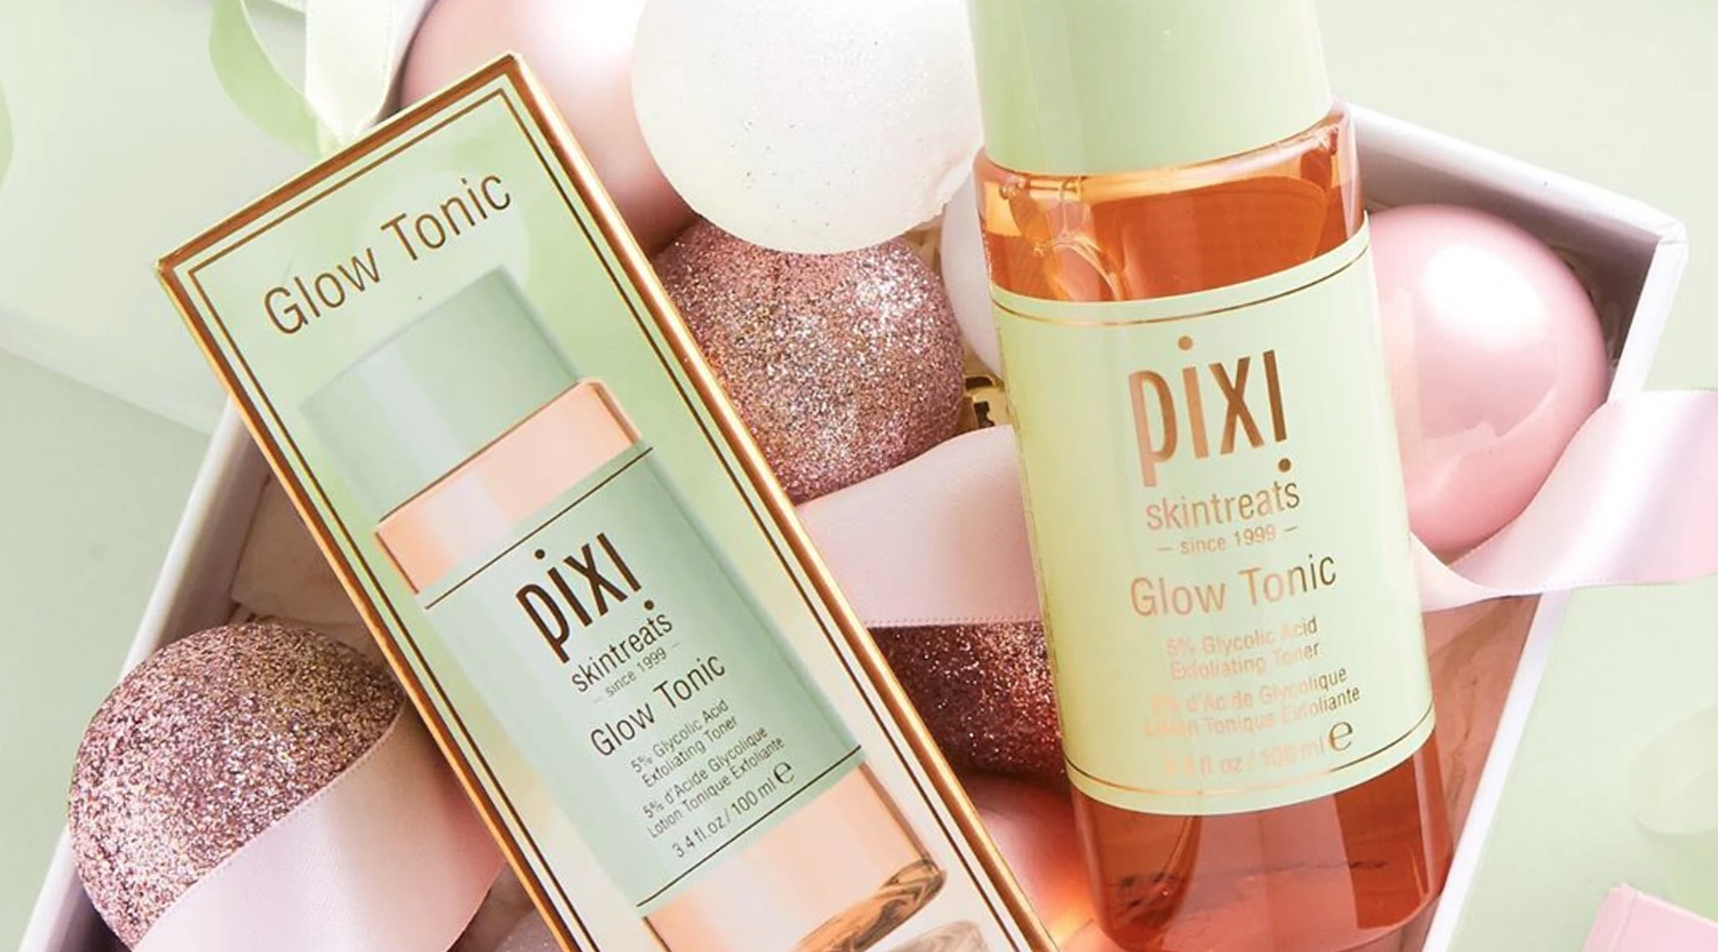 The holiday edition of Pixi Beauty’s Glow Tonic.